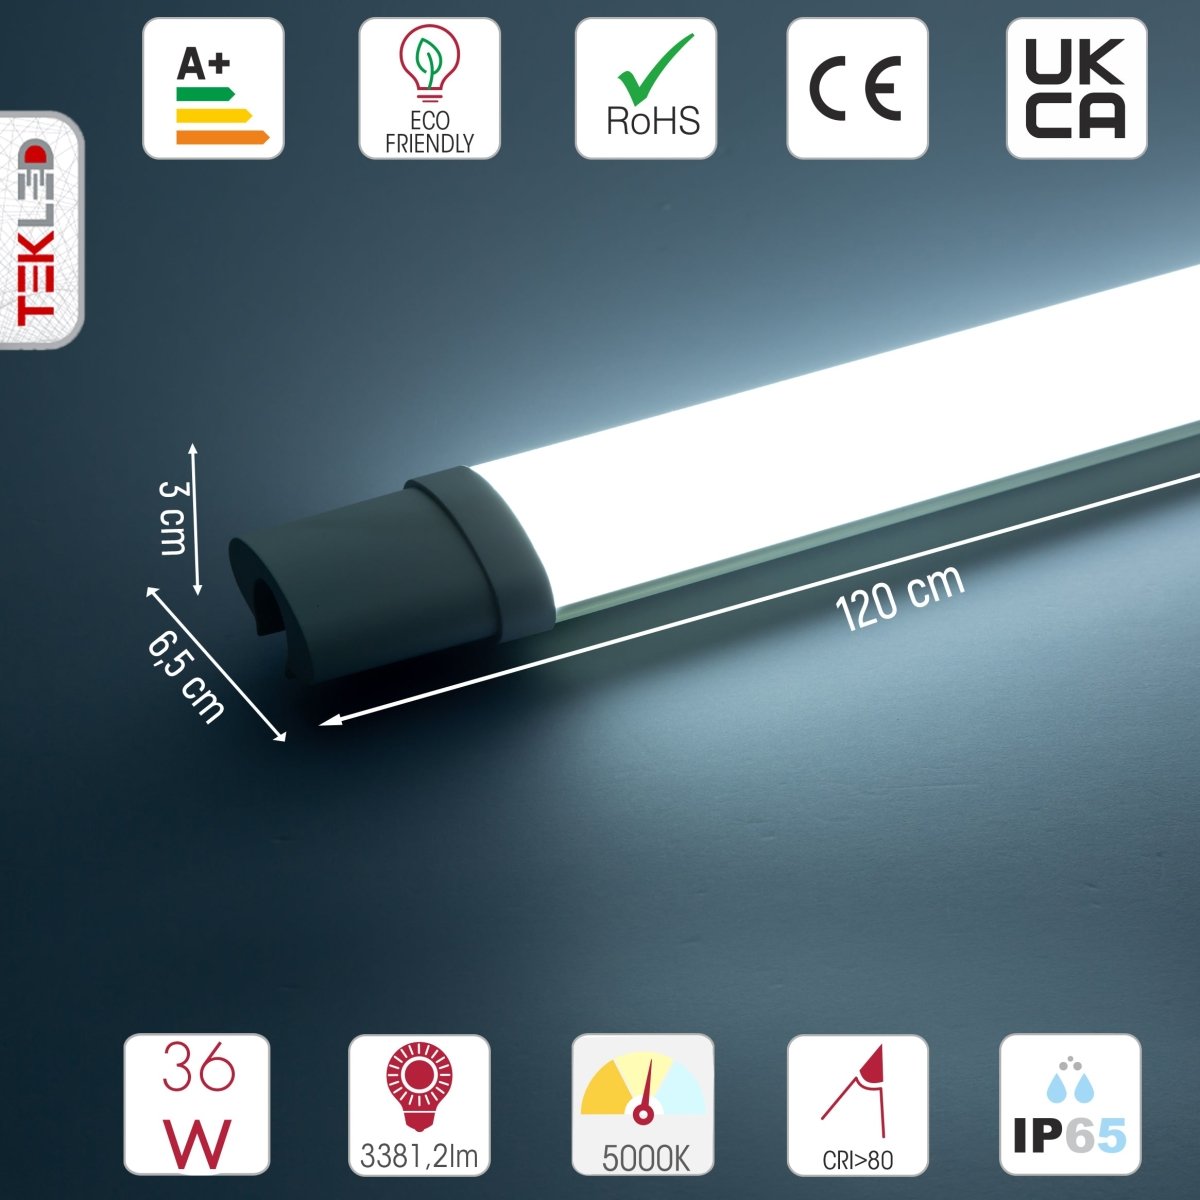 Technical specs and measurements for LED Tri-proof Slim Batten Linear Fitting 36W 5000K Cool White IP65 120cm 4ft